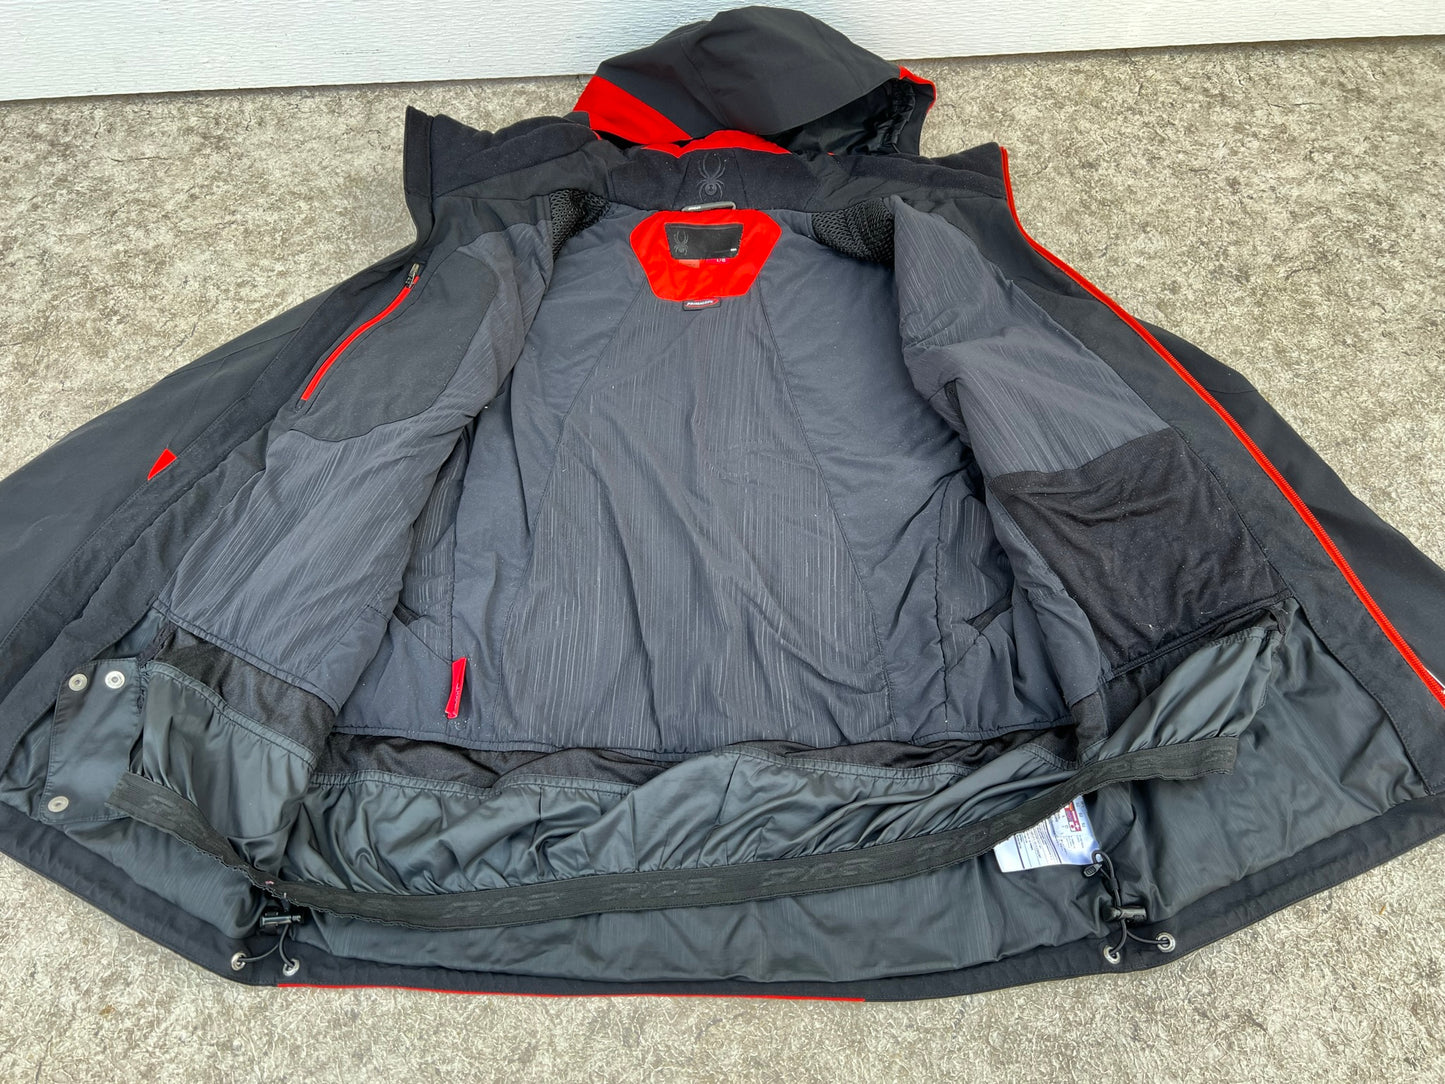 Winter Coat Men's Size Large Spyder Black Red With Snow Belt All Zippers Waterproof Sealed Seams As New